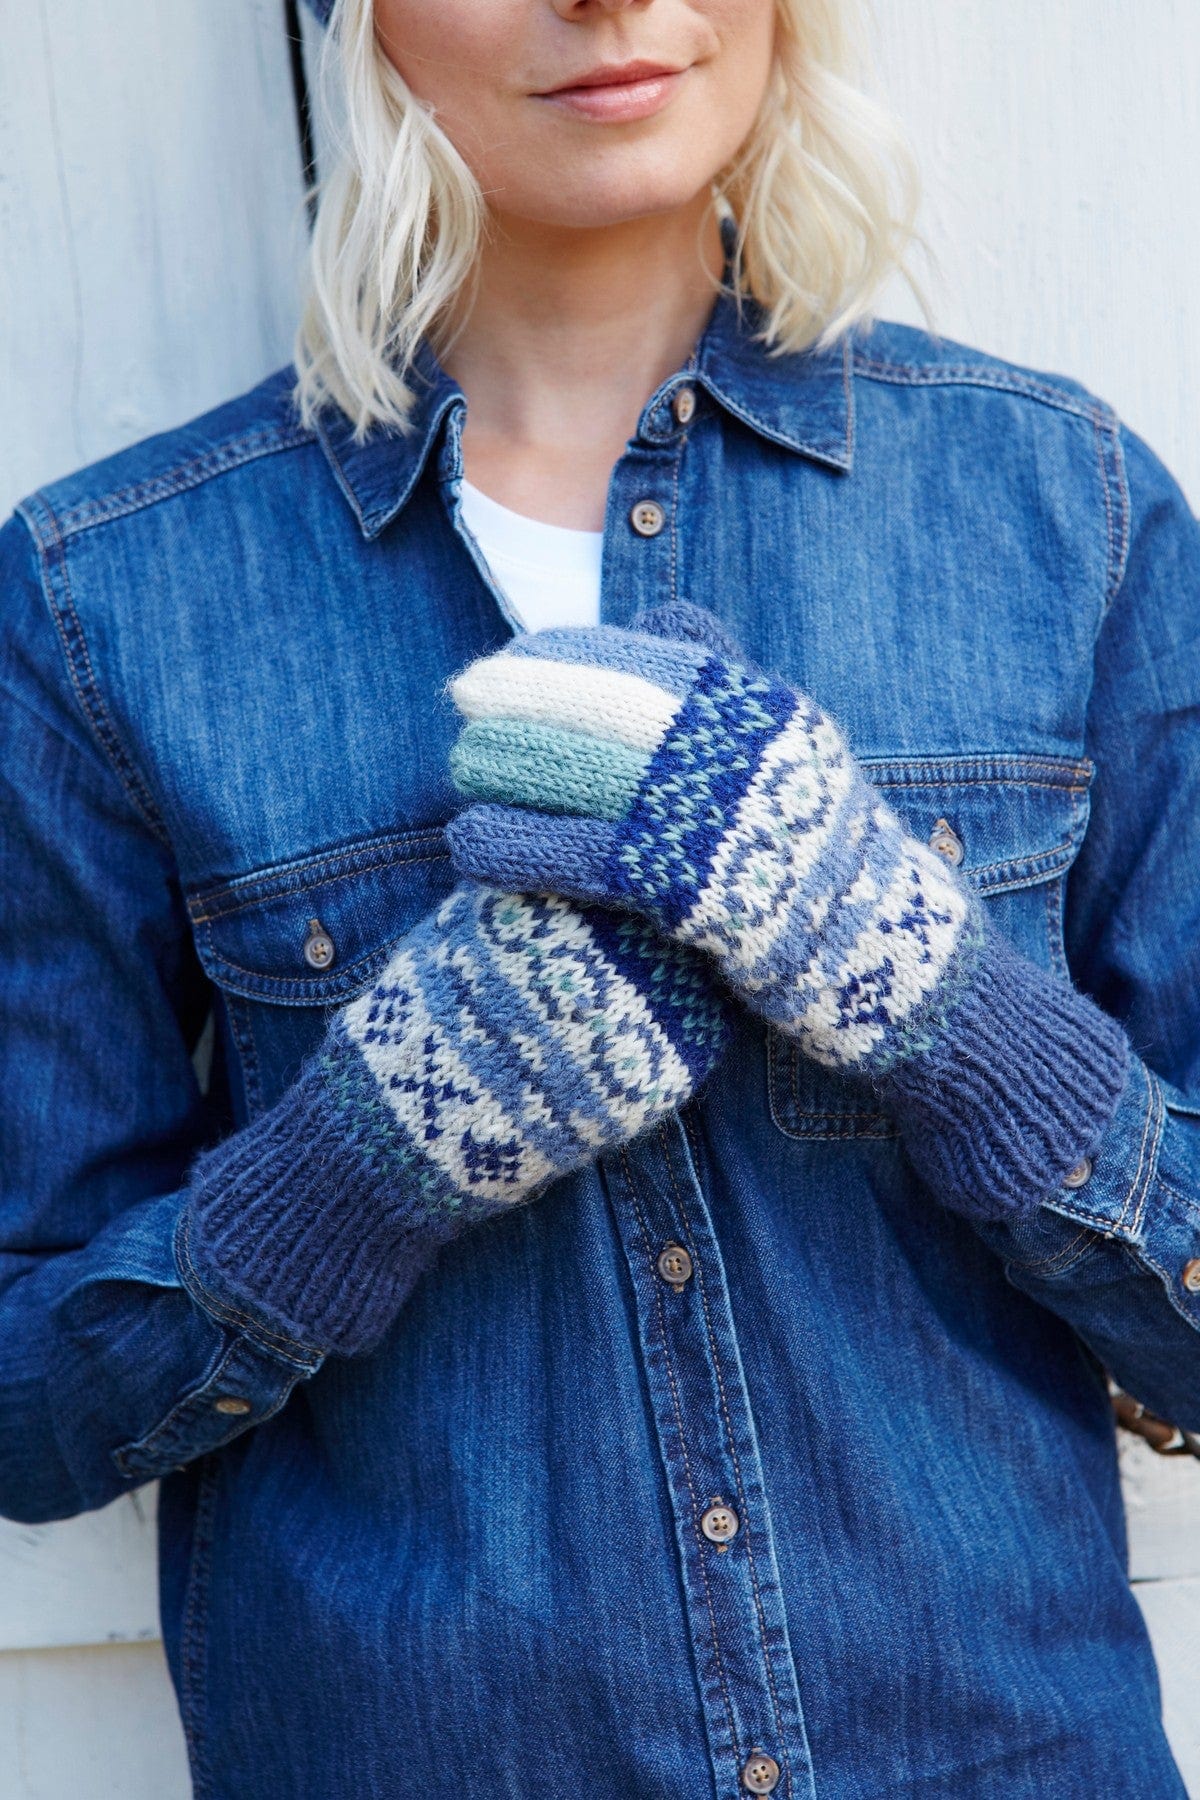 lusciousscarves wool gloves Pachamama Finisterre Gloves Denim